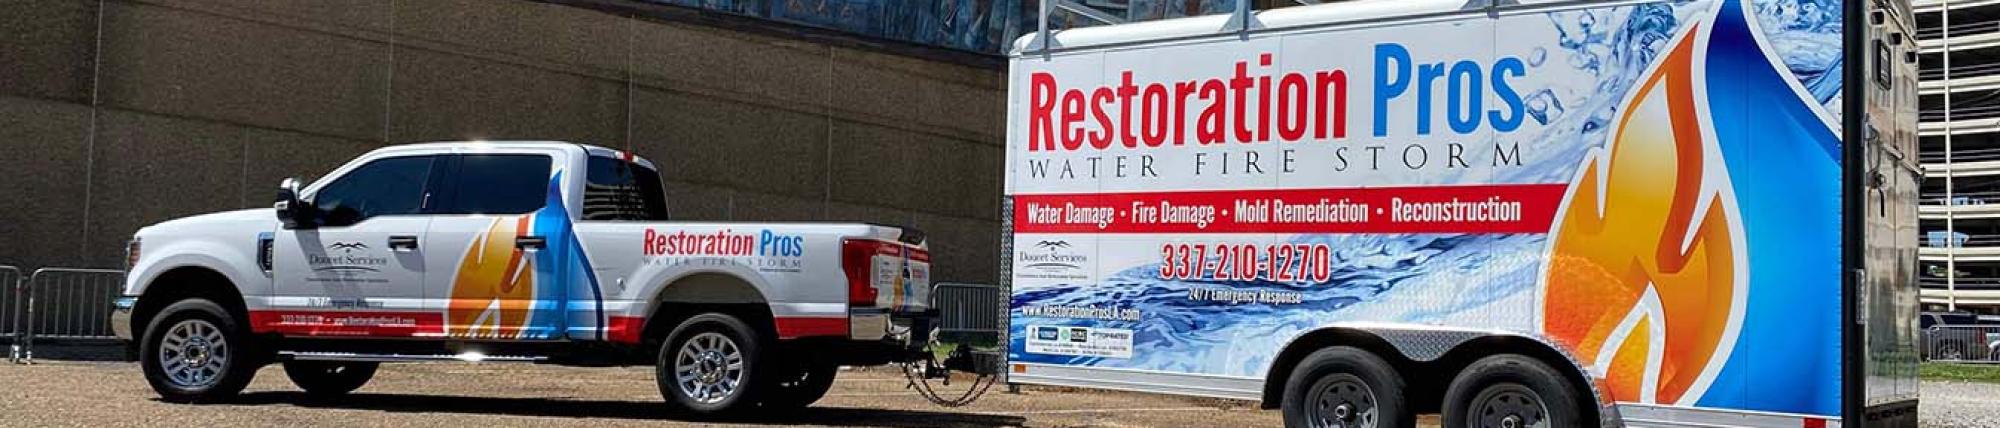 image of water restoration truck in parking lot